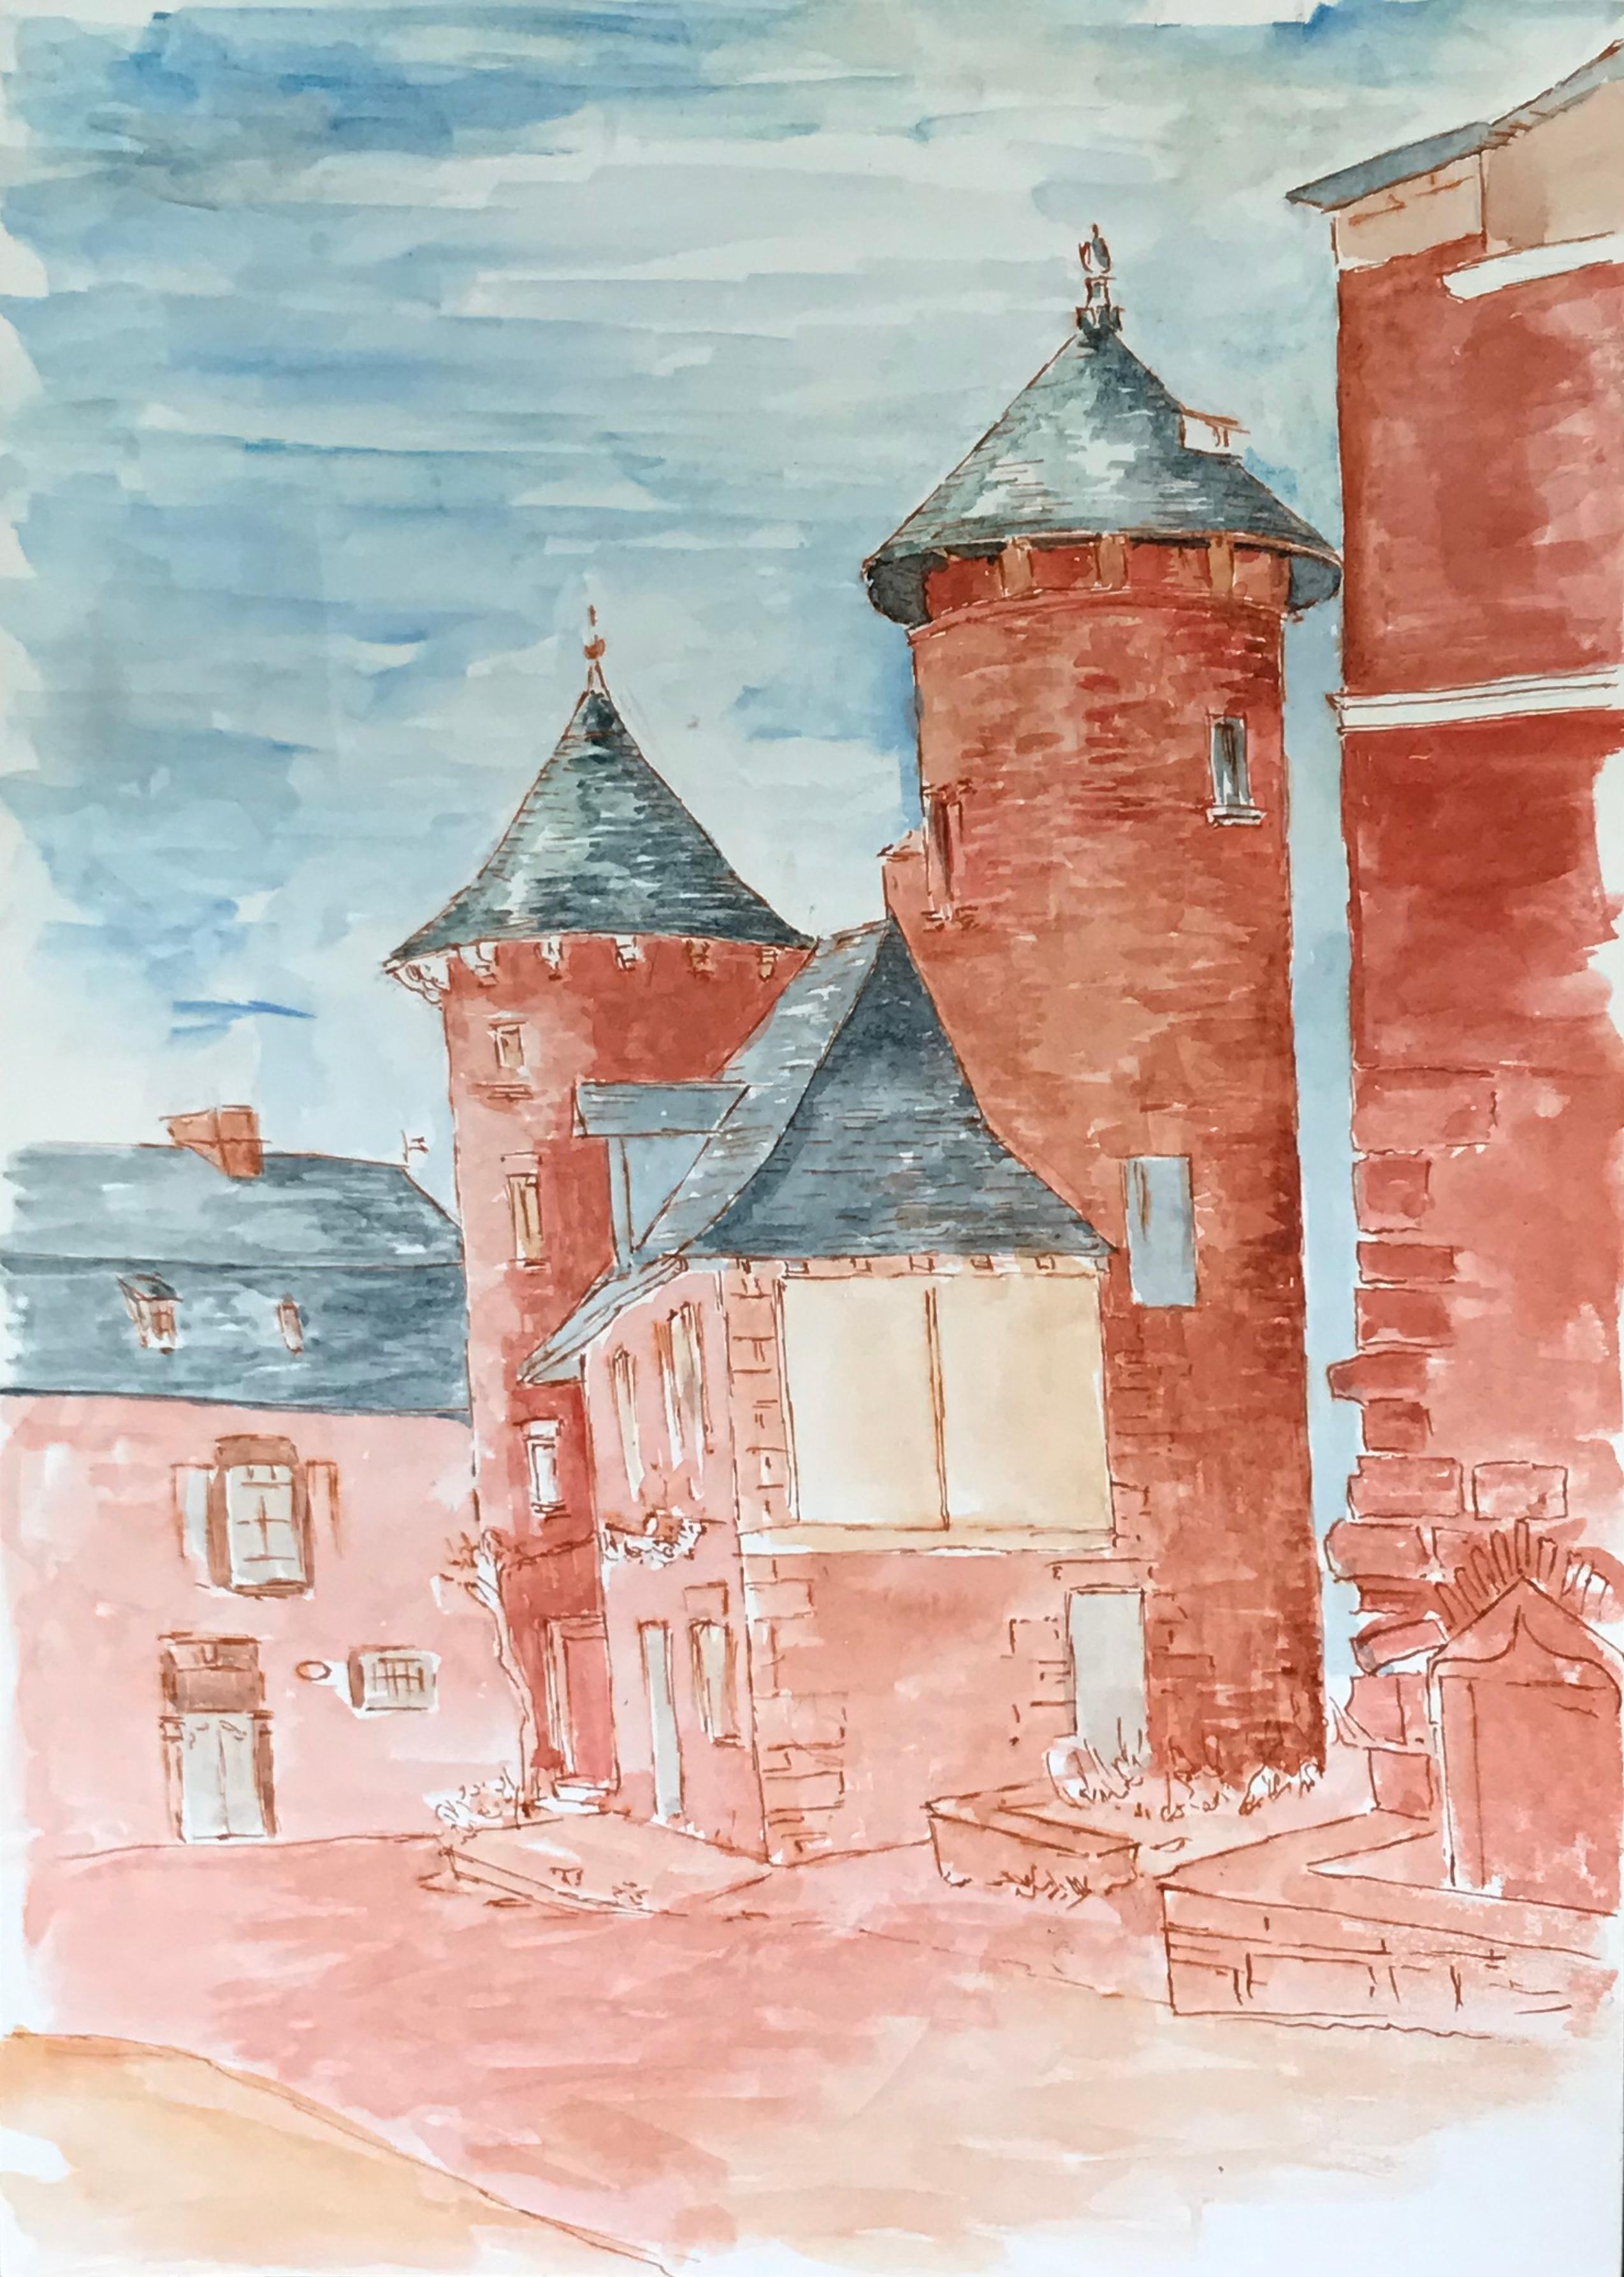 Bernard Labbe Figurative Art - 1950's Modernist/ Cubist Painting - Red & Blue French Buildings Watercolour 